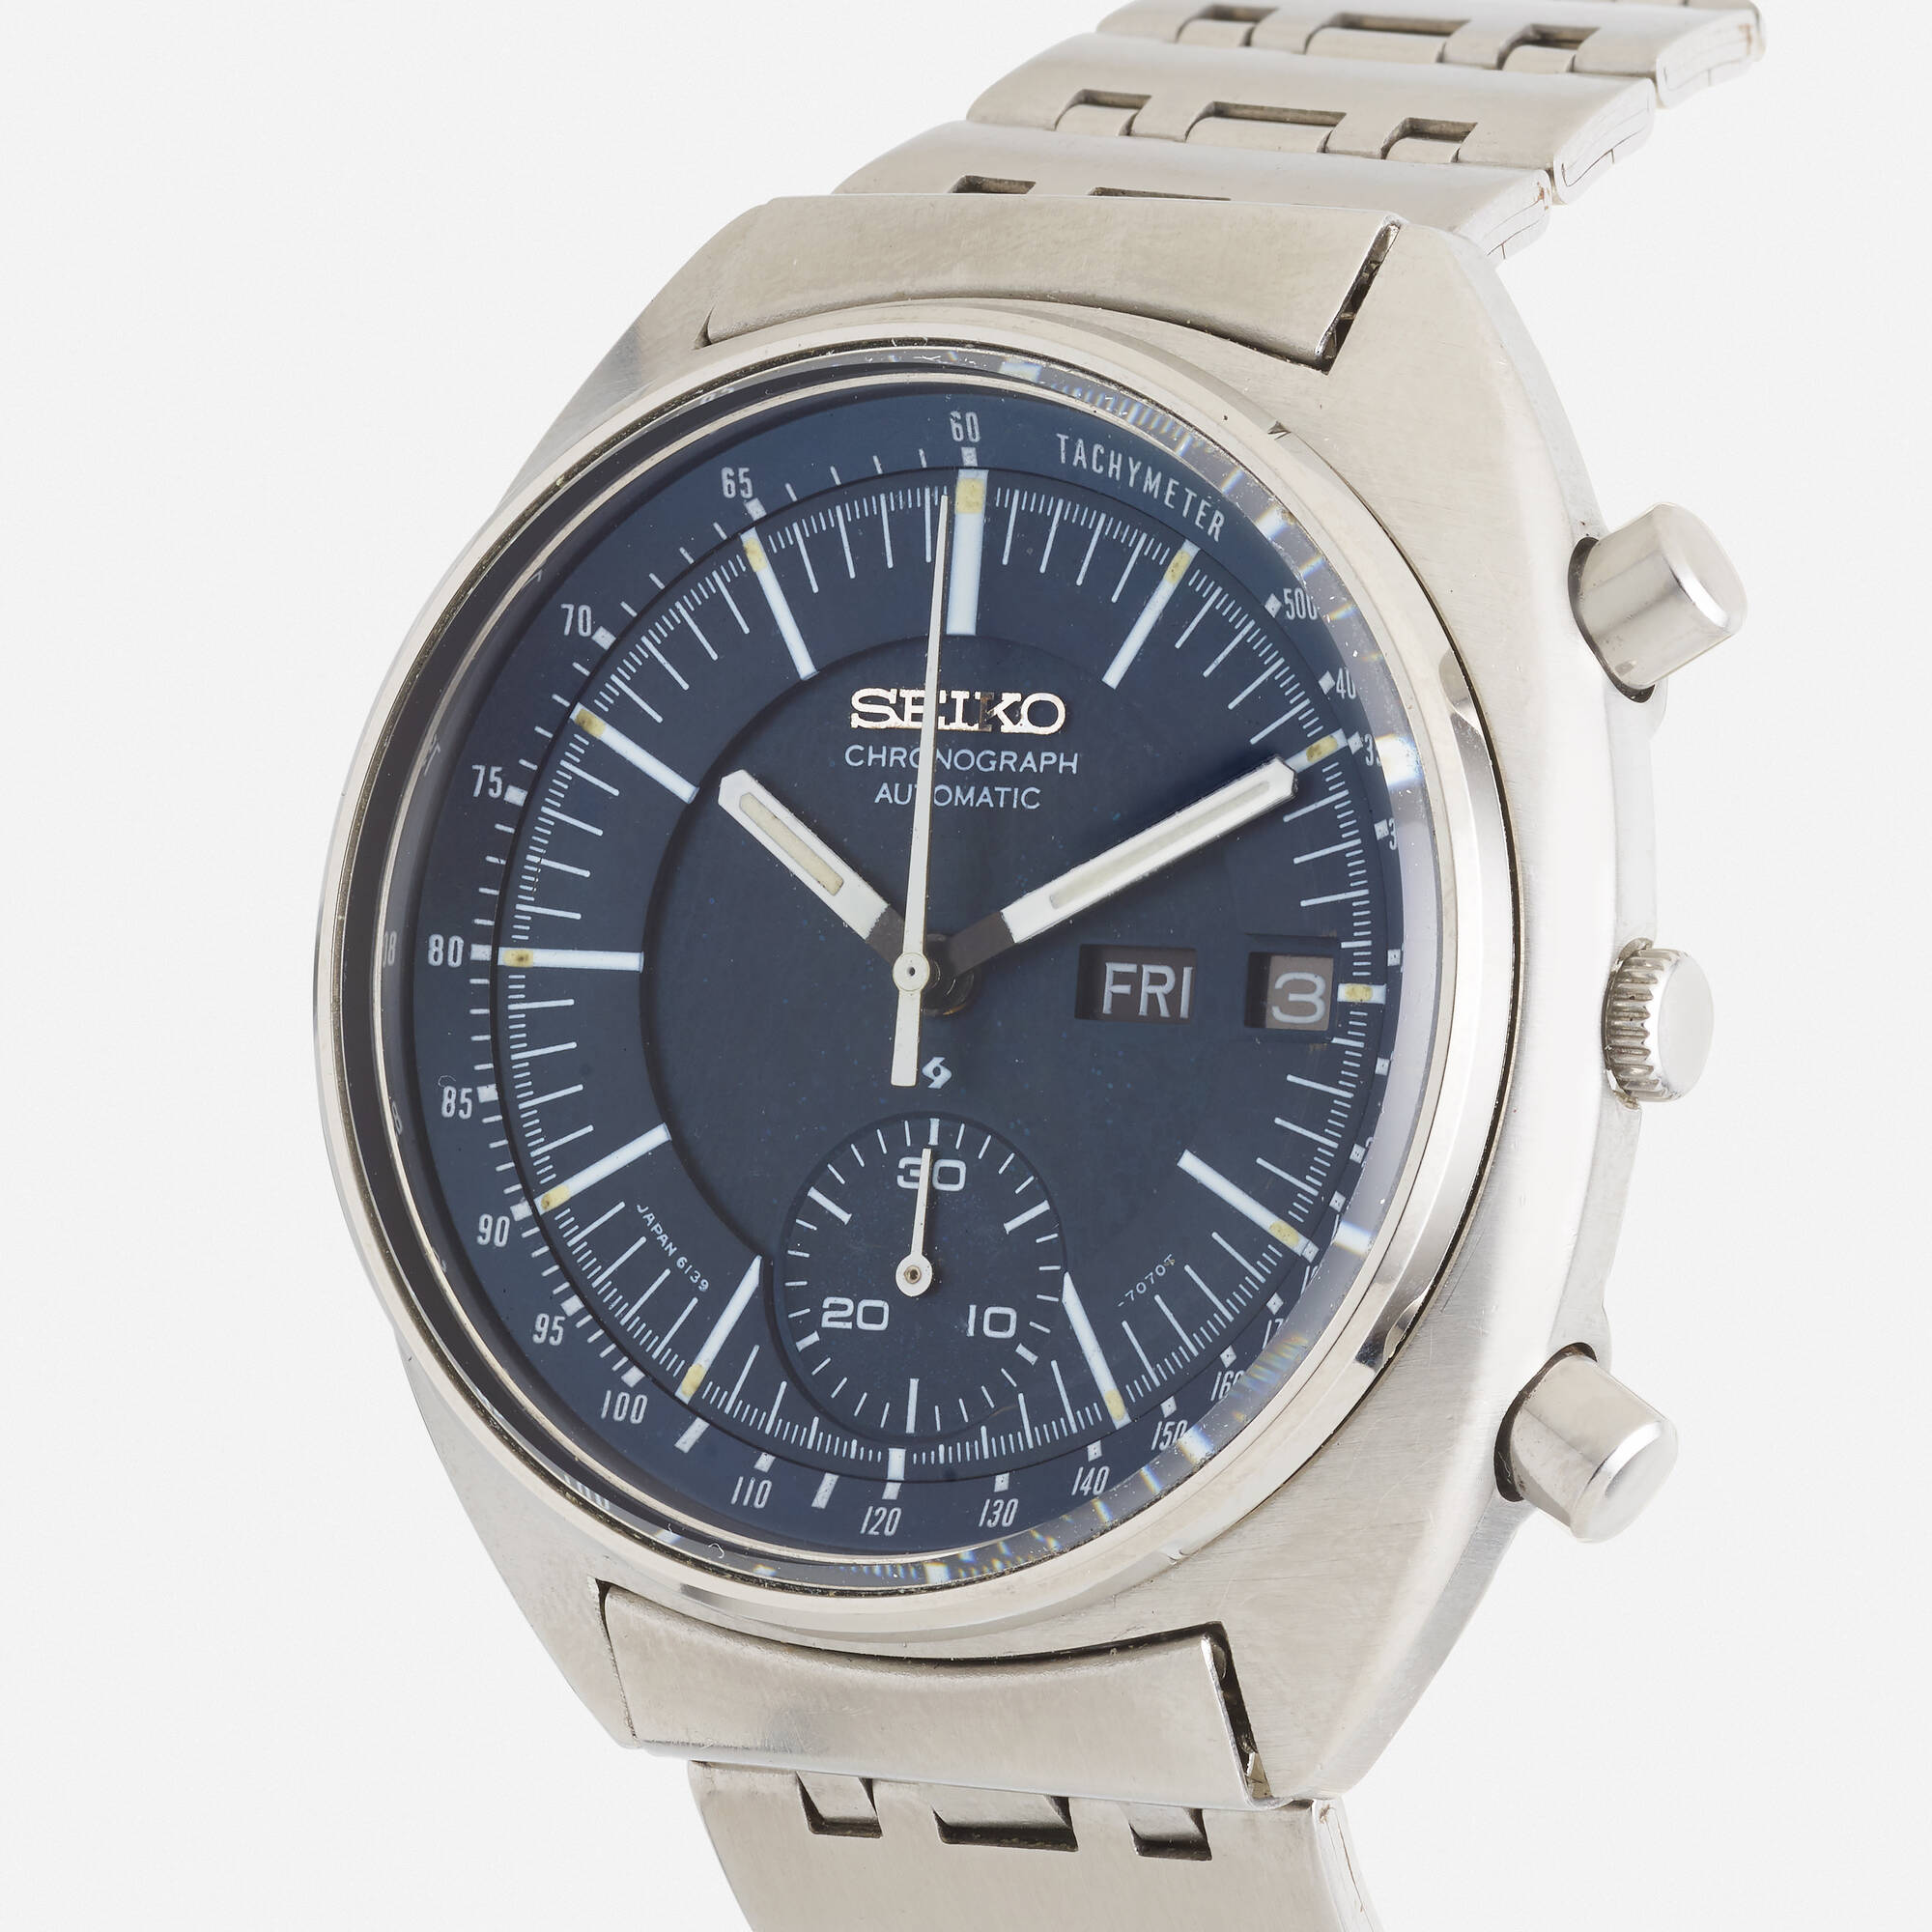 145: SEIKO, 'Speedmaster' chronograph wristwatch, Ref. 6139-7070T <  Watches: The Chicago Edit, 1 April 2022 < Auctions | Rago Auctions